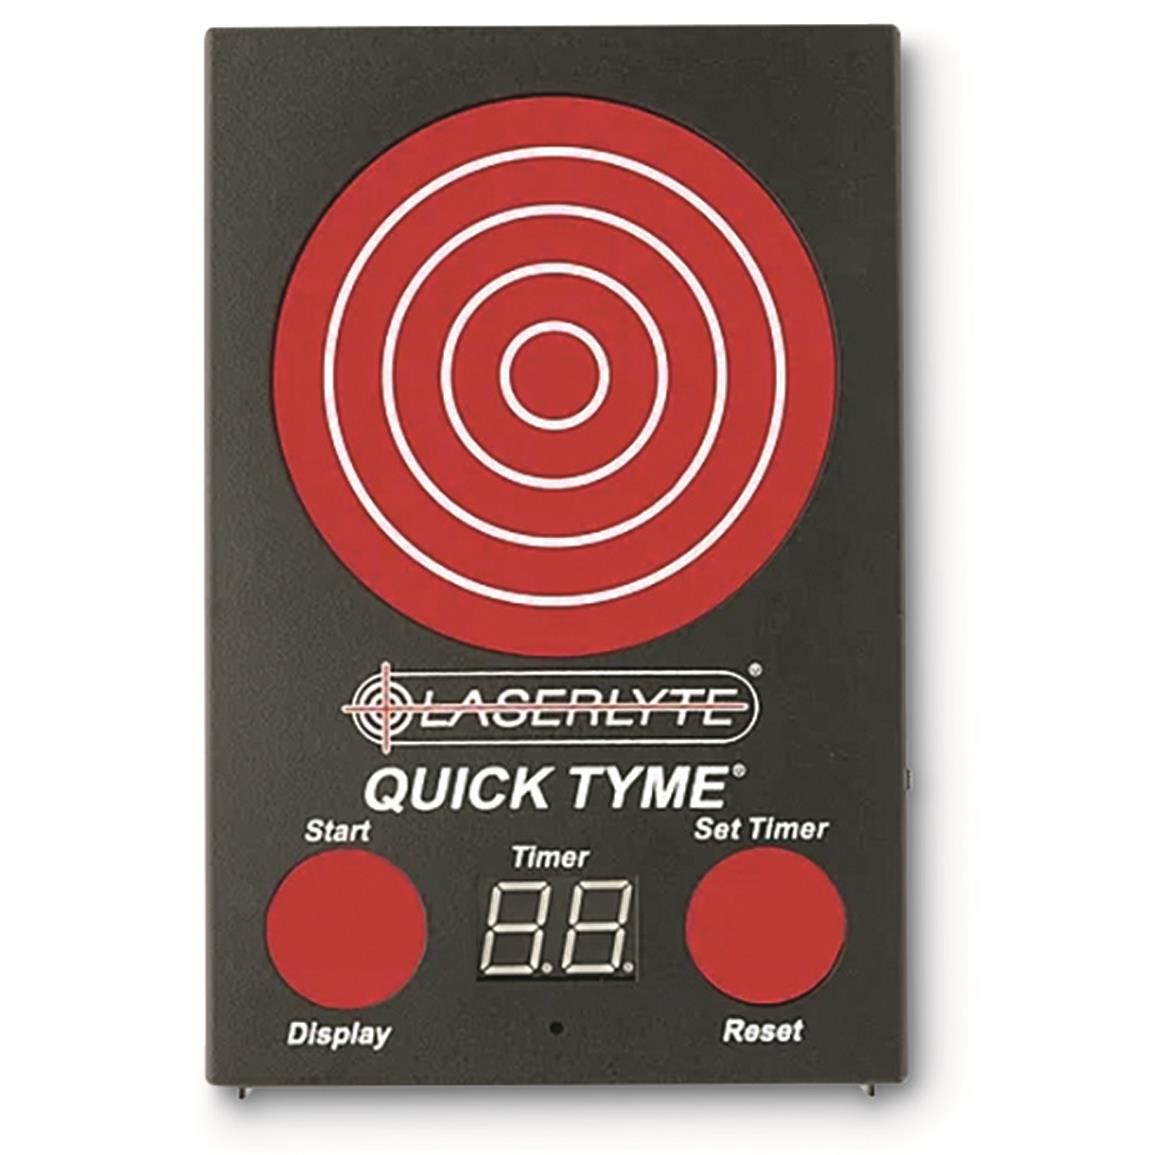 LaserLyte Quick Tyme Trainer Target